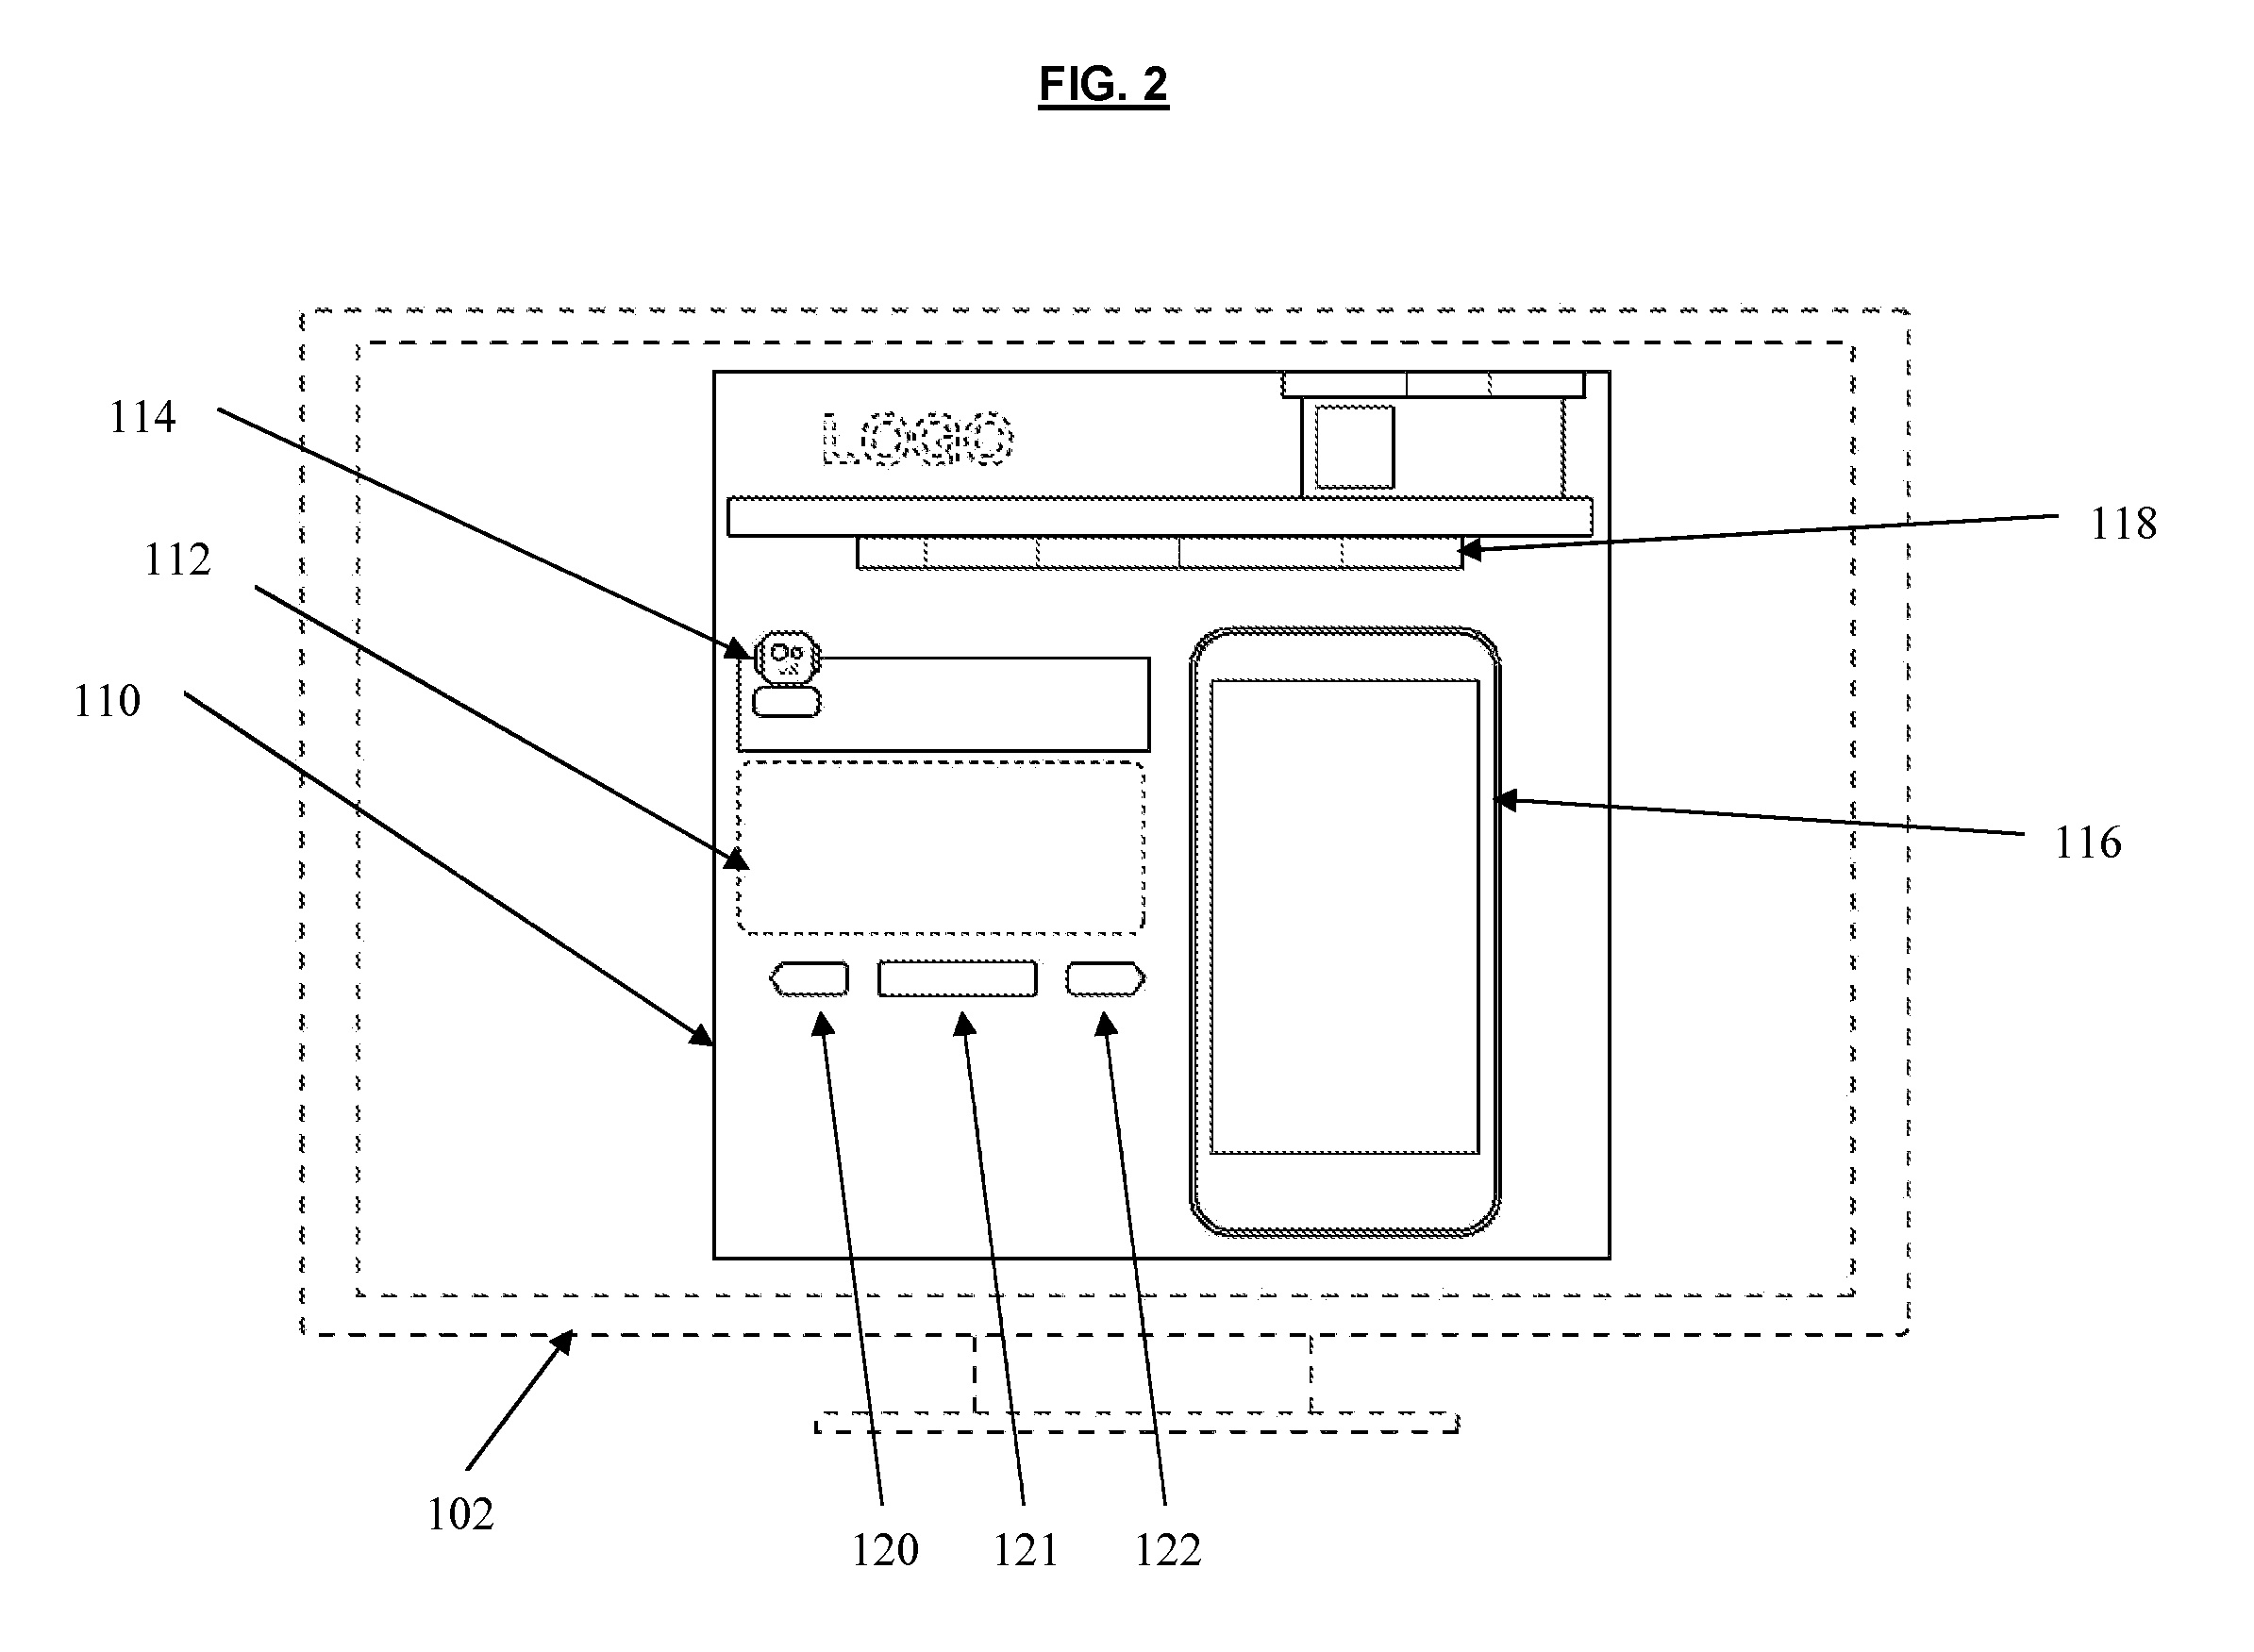 Systems and methods for a mobile application development and deployment platform